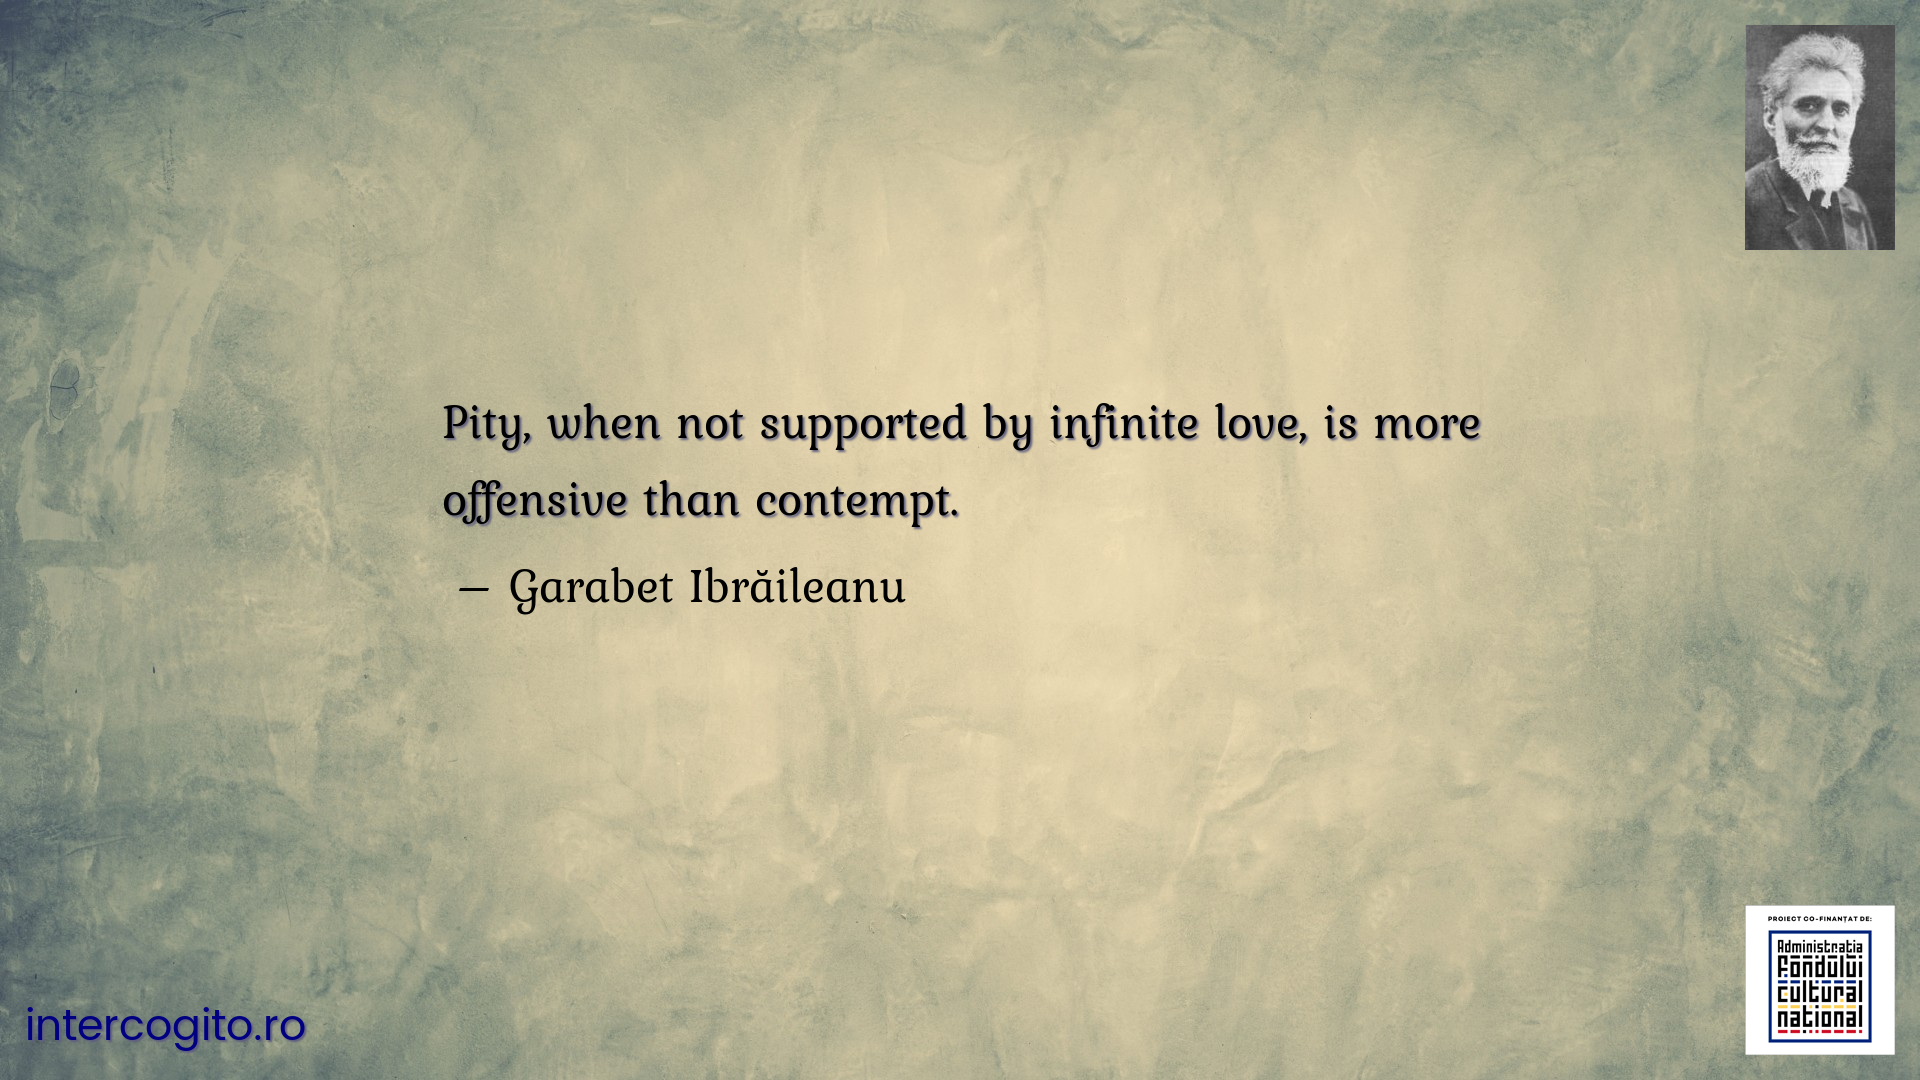 Pity, when not supported by infinite love, is more offensive than contempt.